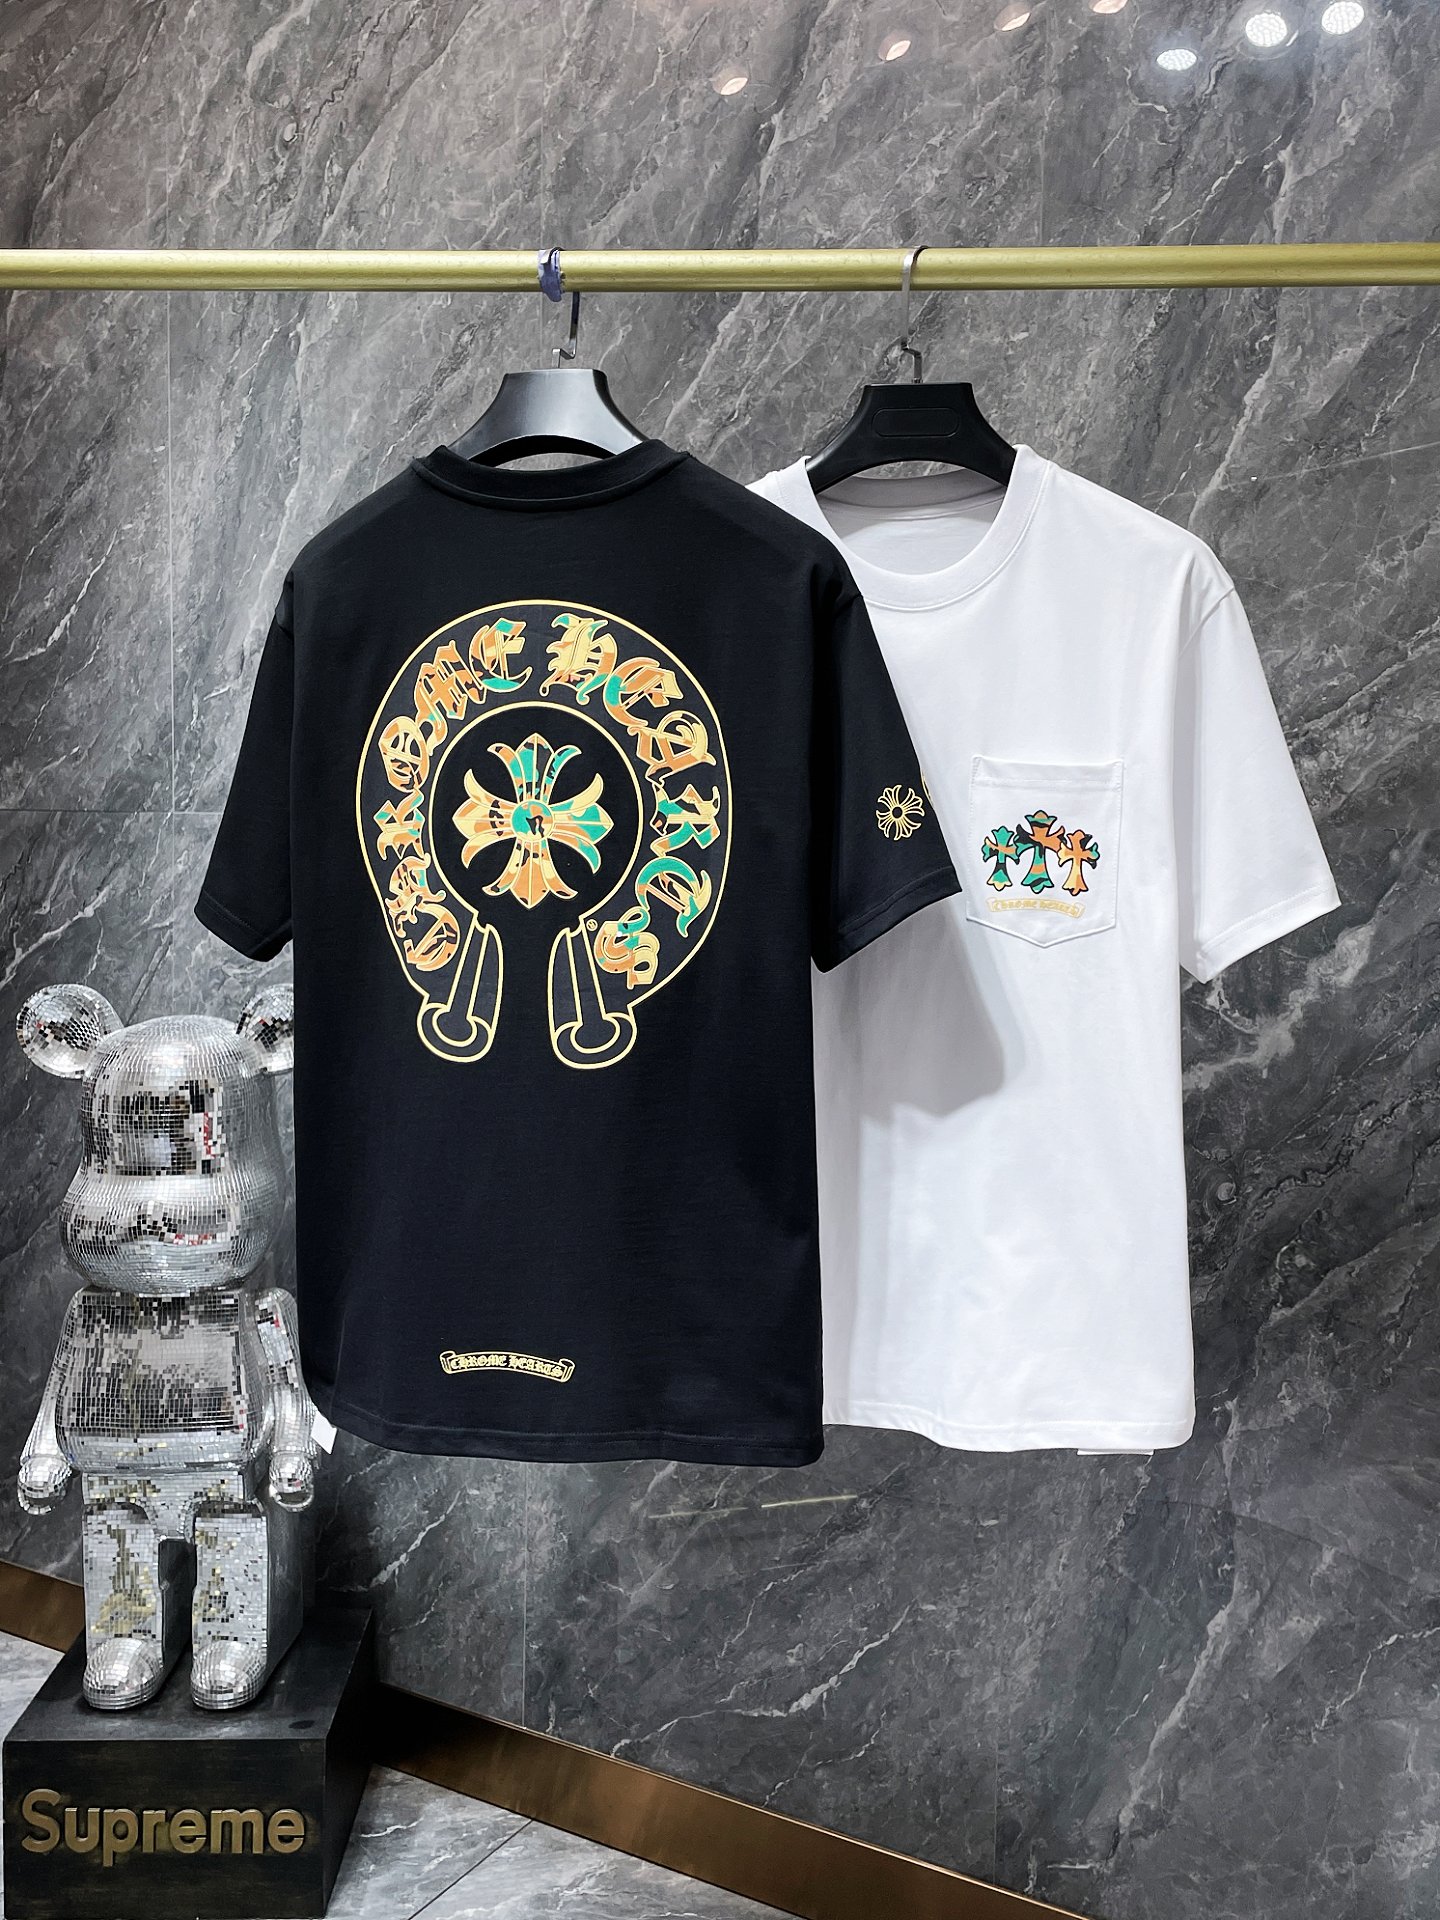 Chrome Hearts Clothing T-Shirt Cheap High Quality Replica
 Black White Printing Summer Collection Short Sleeve